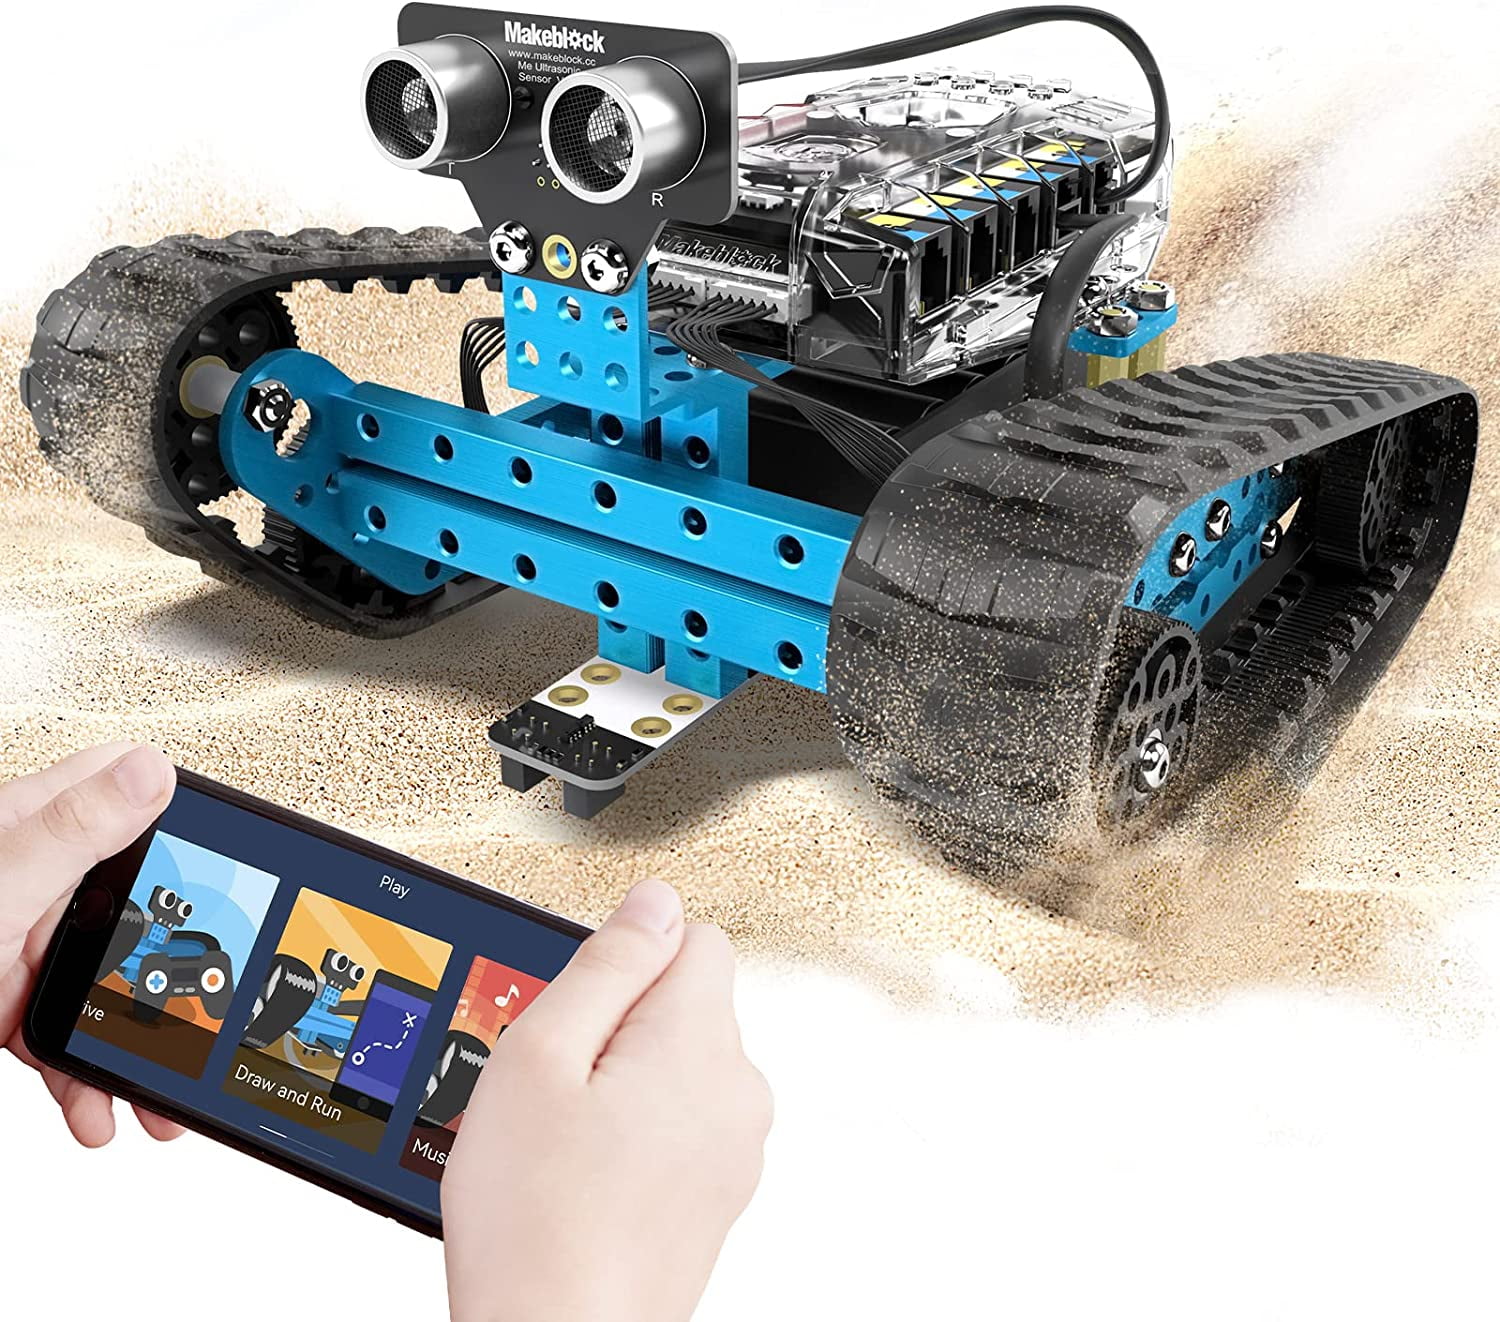 Robotic Coding Kit with Remote Control for Kids – Bluetooth